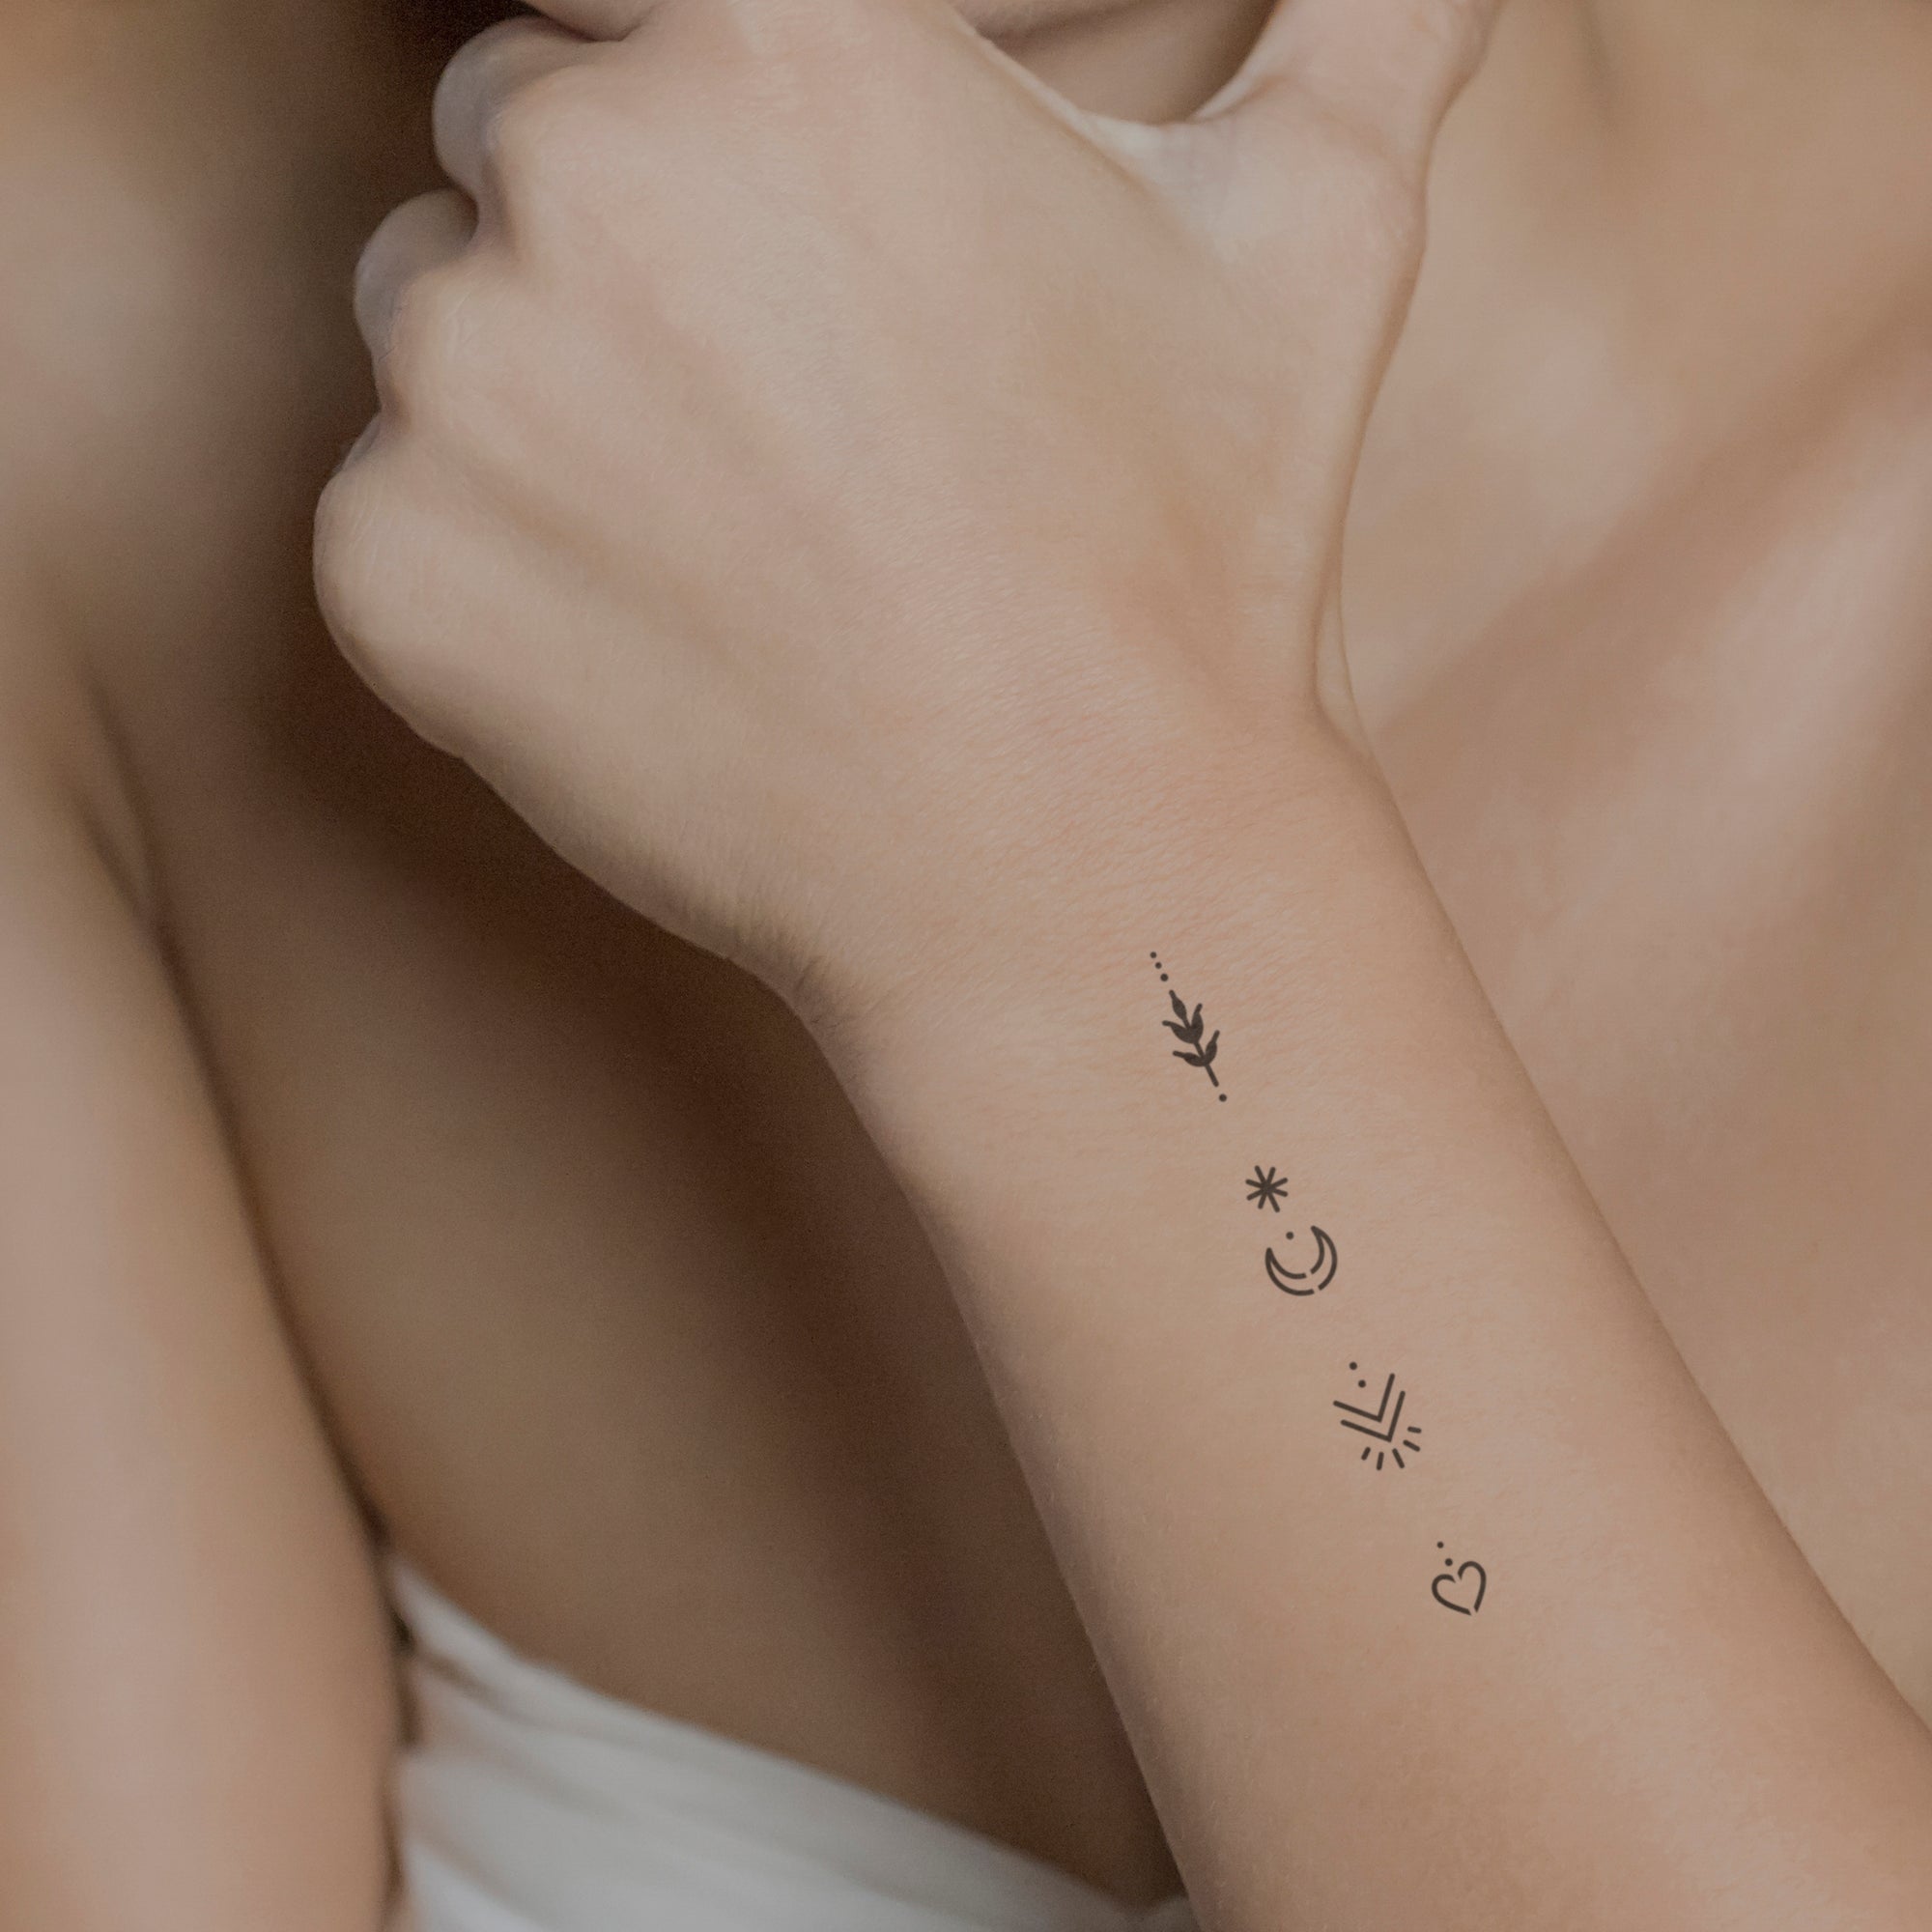 Incredible Tattoos for Every Star Sign | Mom.com